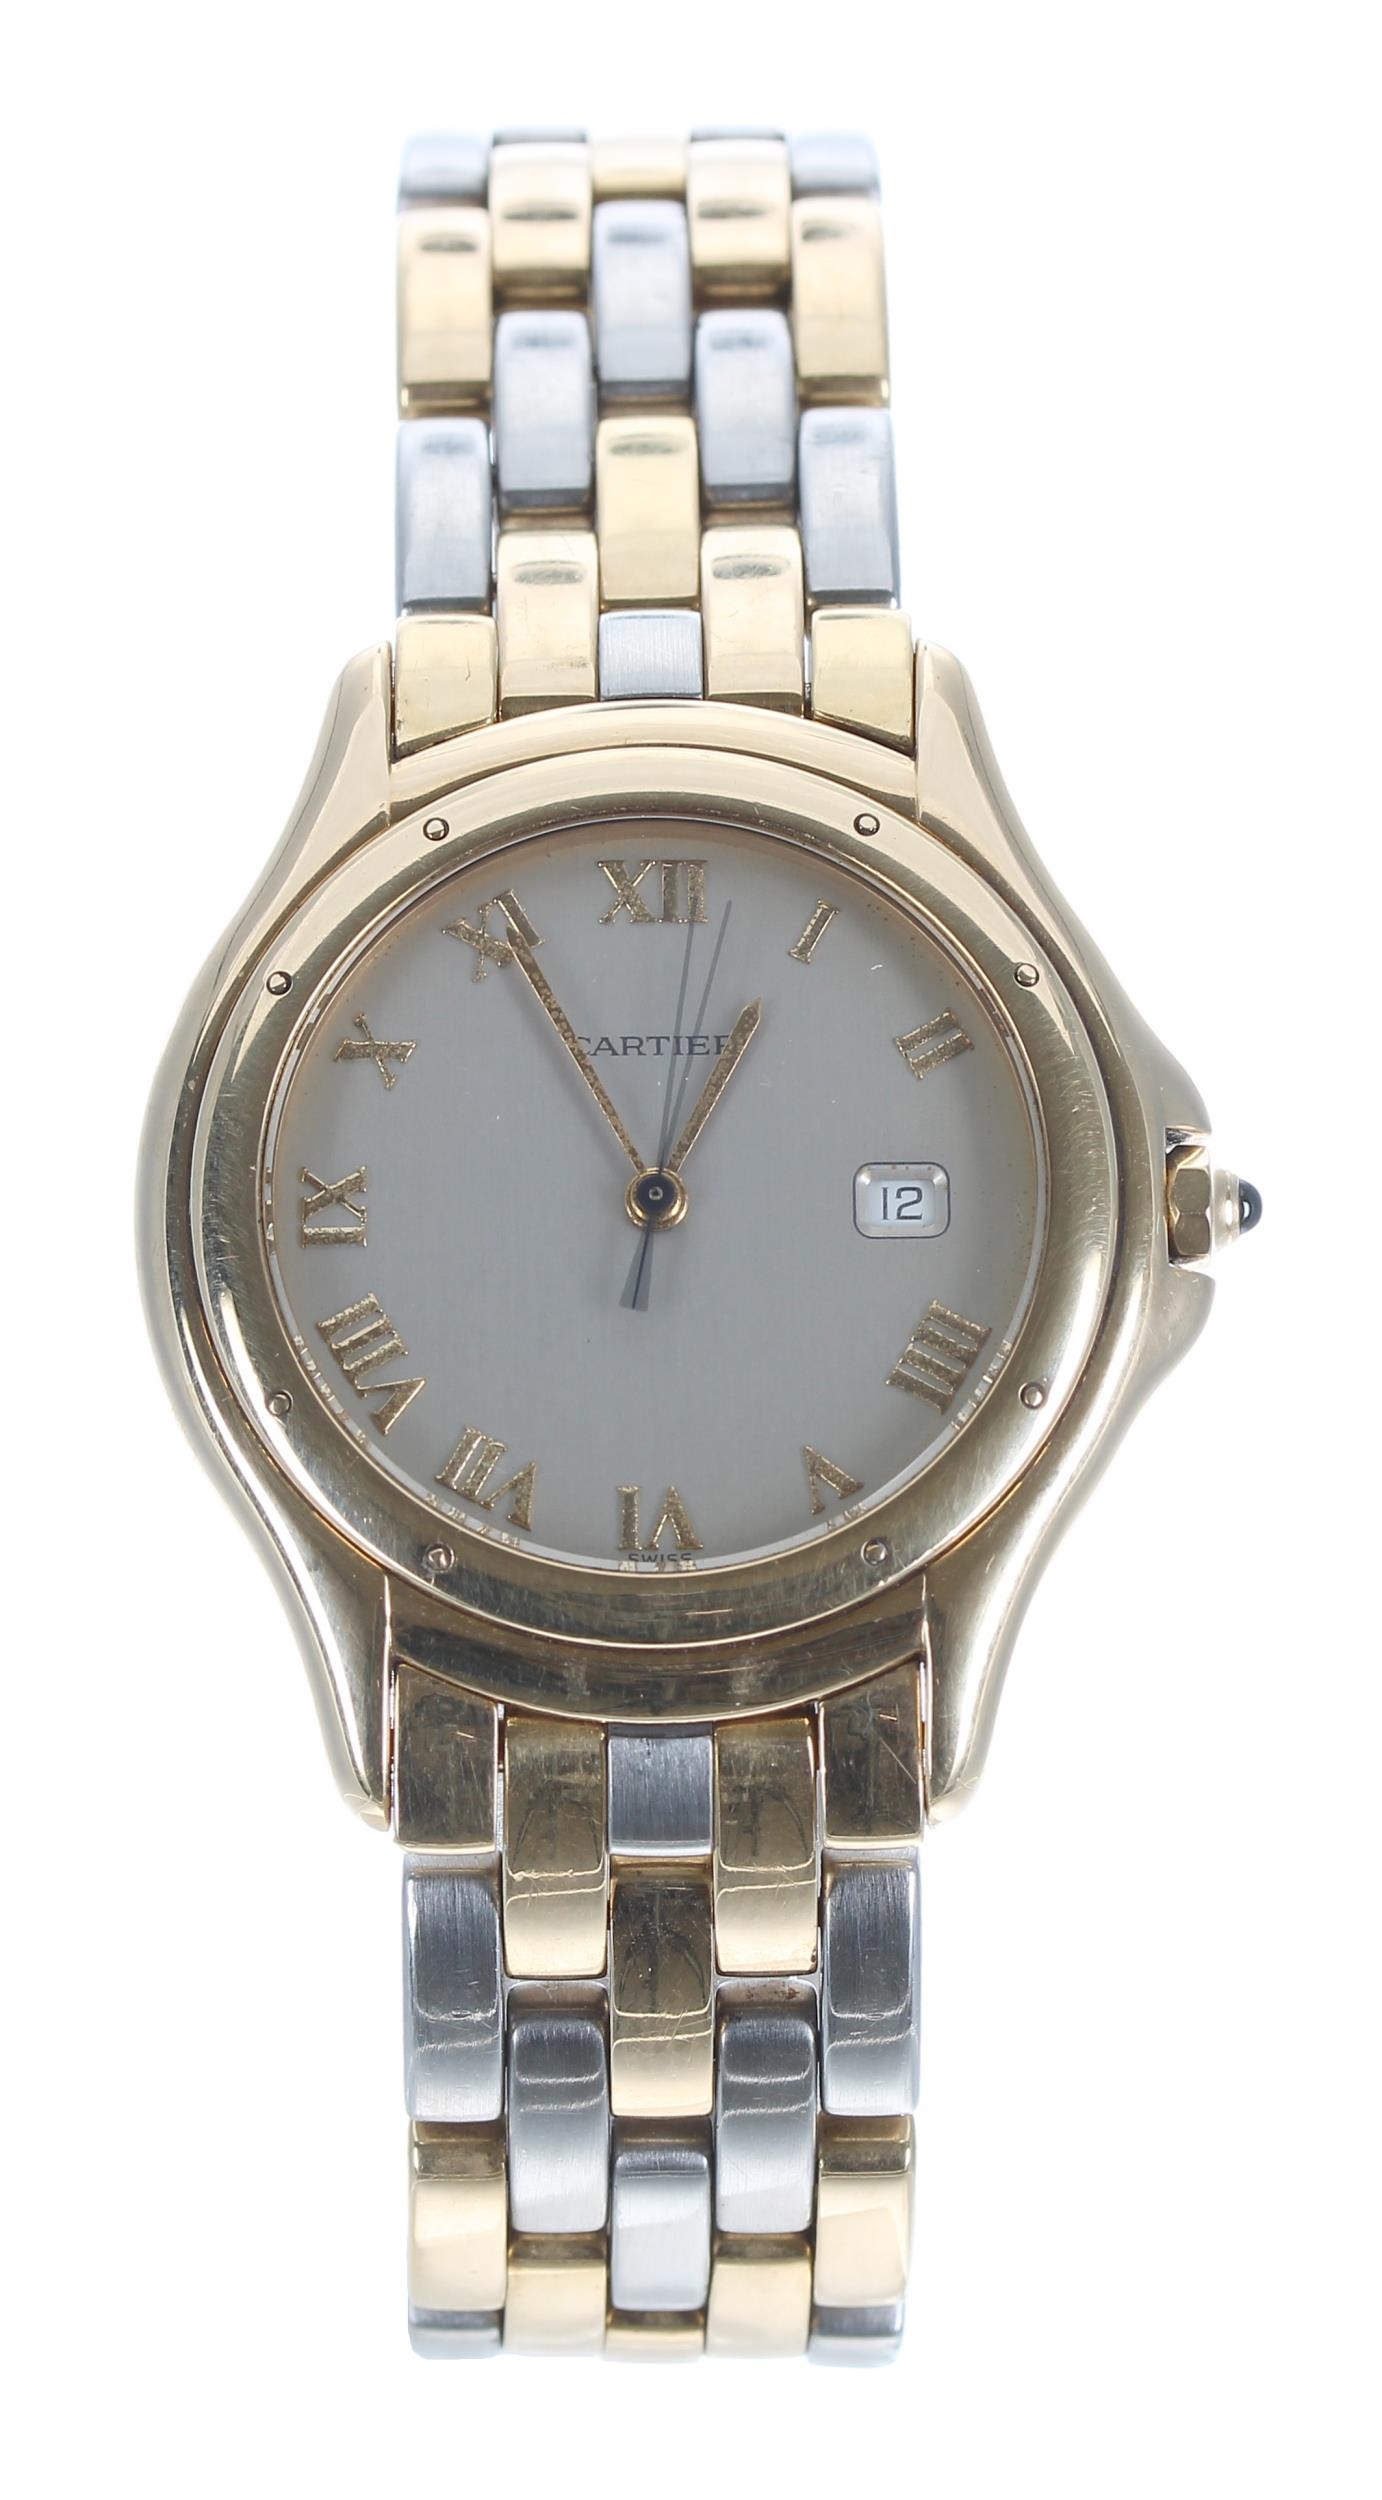 Cartier Cougar 18ct and stainless steel wristwatch, reference no. 887904C, serial no. 039xx, Roman